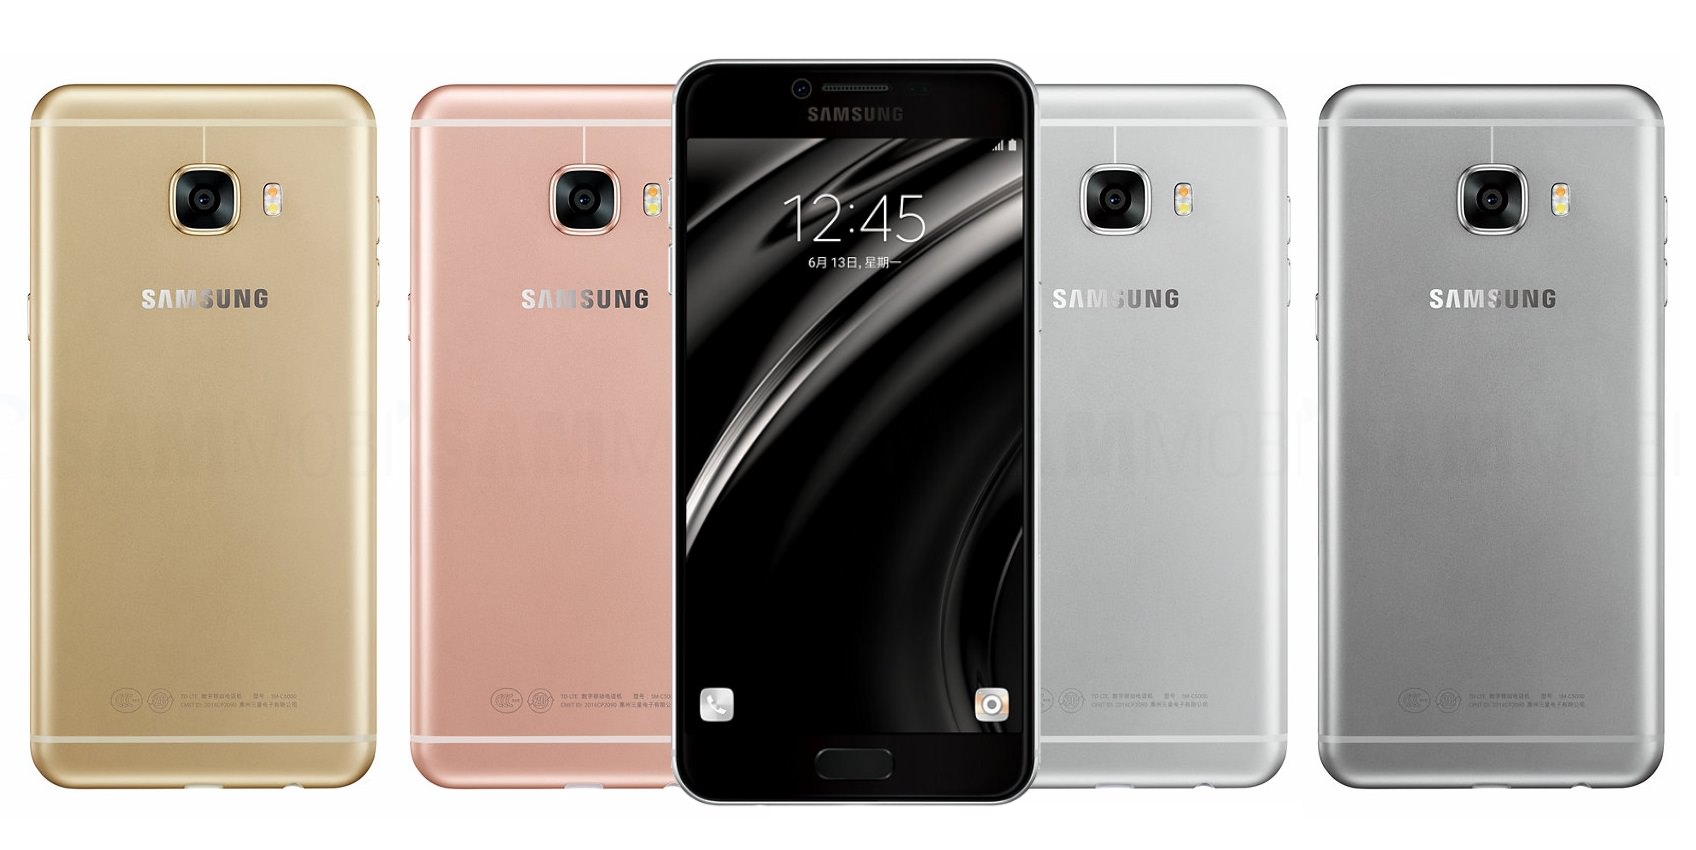 Samsung Galaxy C5 Fully Exposed Ahead of Official Release weboo co